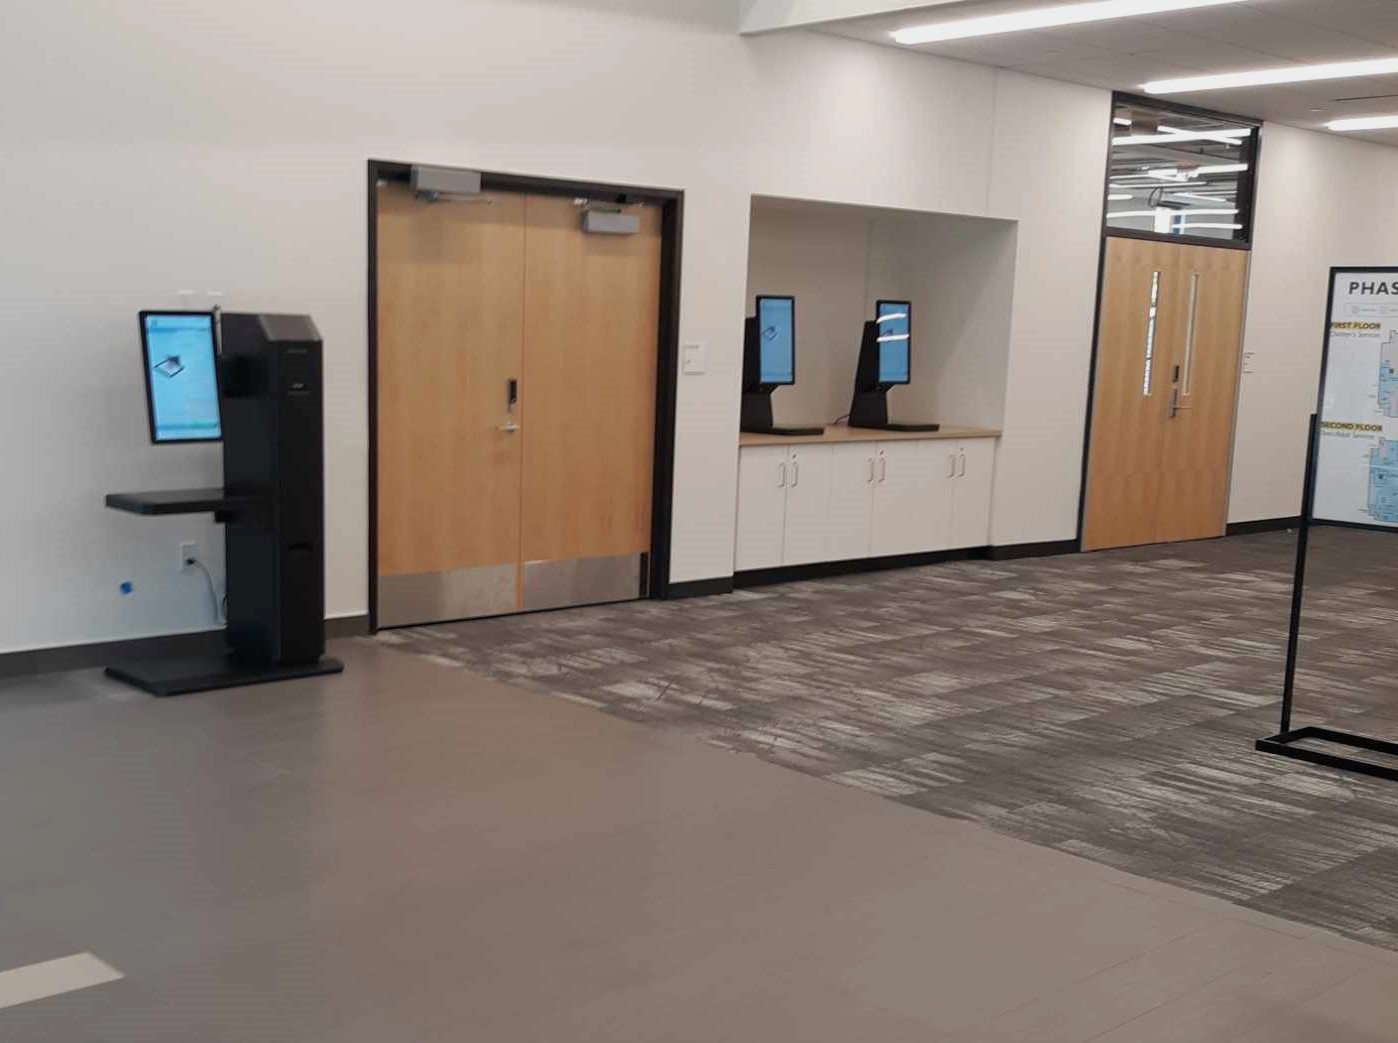 New self-stand checkout stations